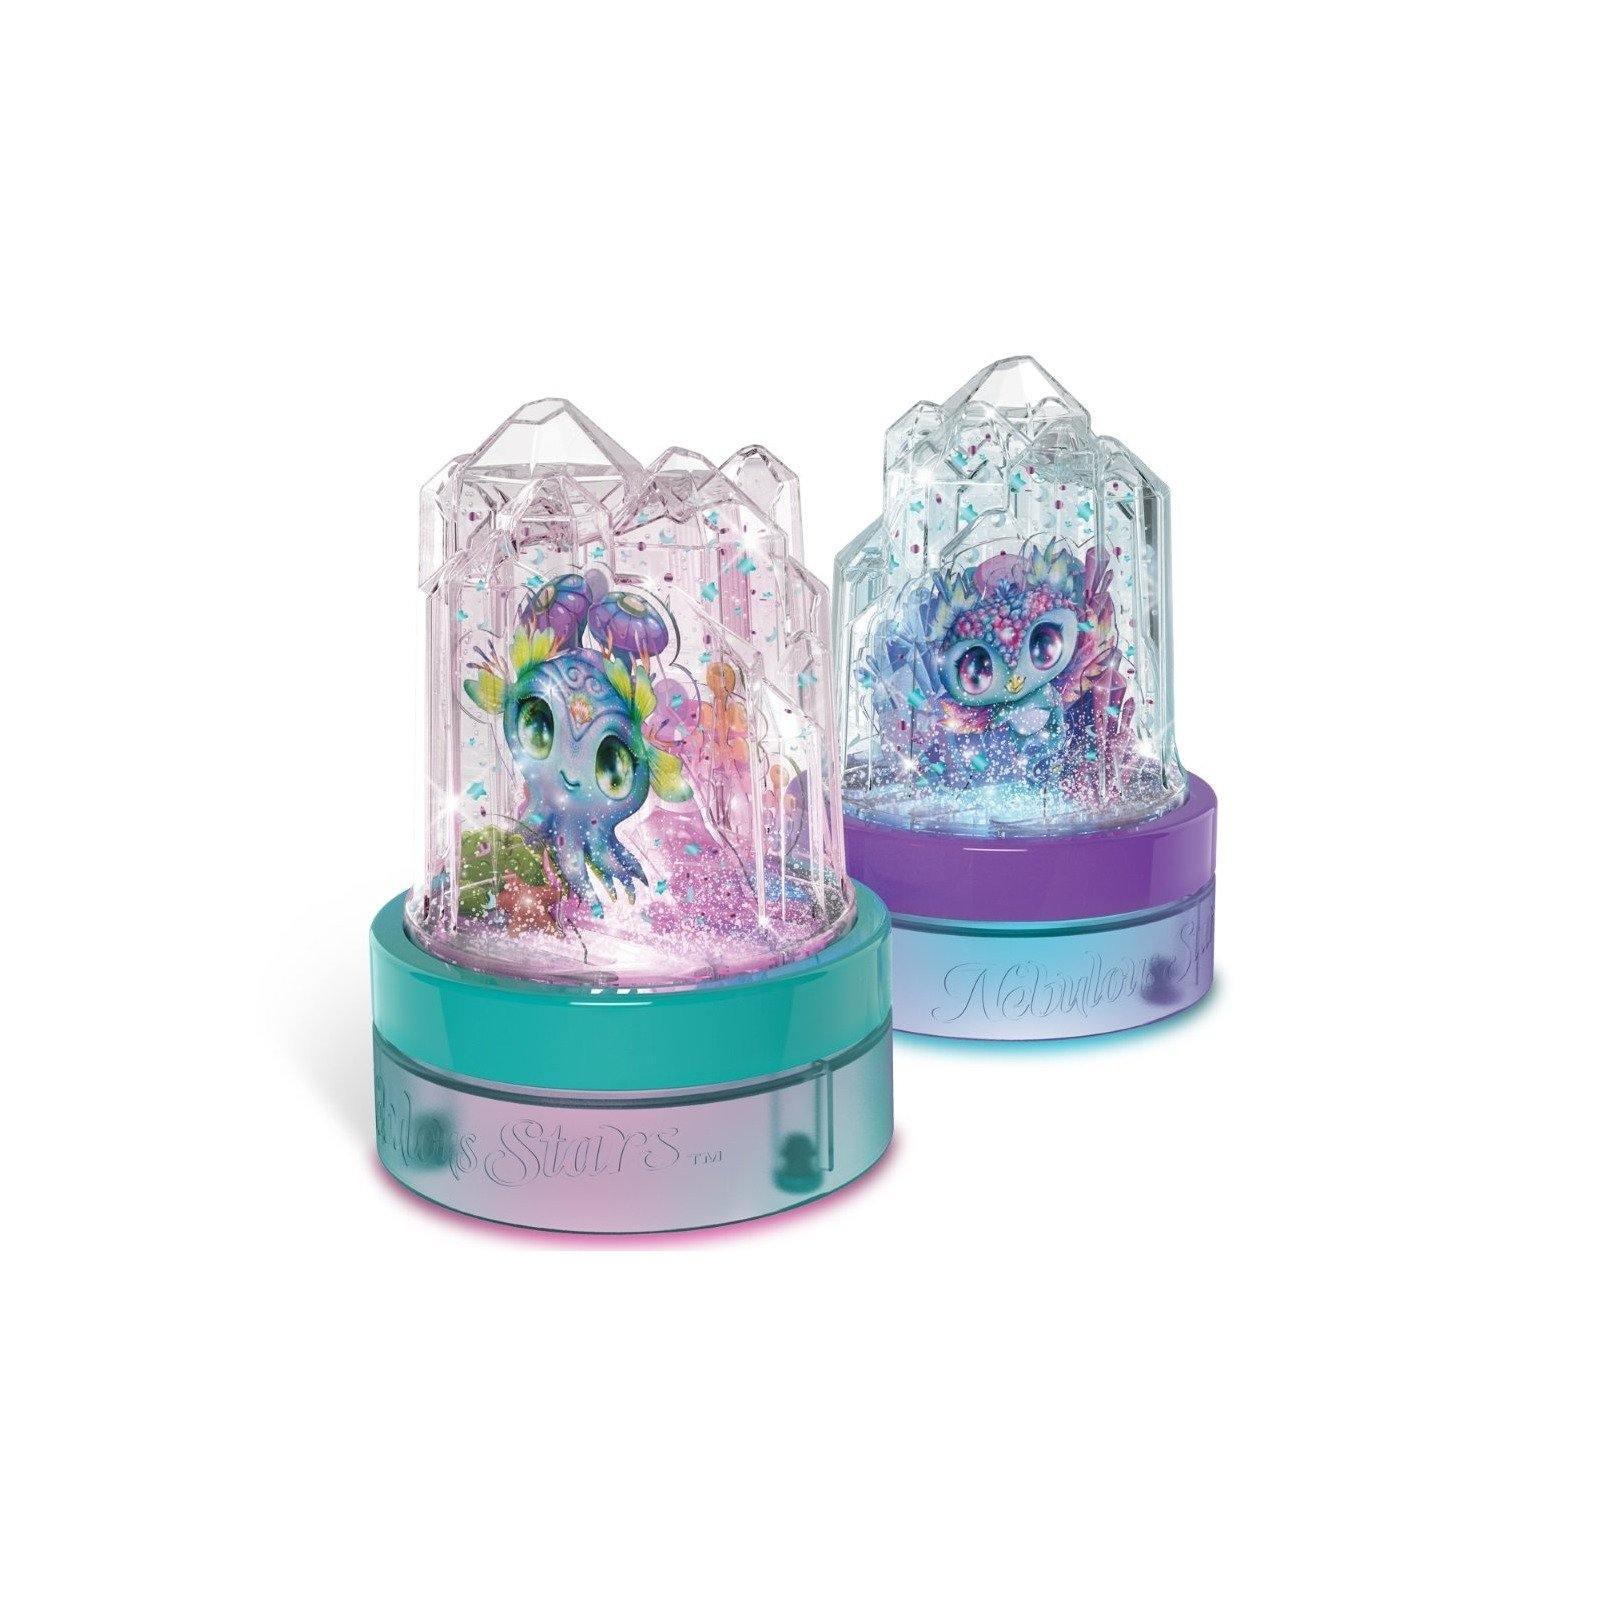 Nebulous Stars Crystal Snow Globes - BumbleToys - 8-13 Years, Drawing & Painting, Eagle Plus, Girls